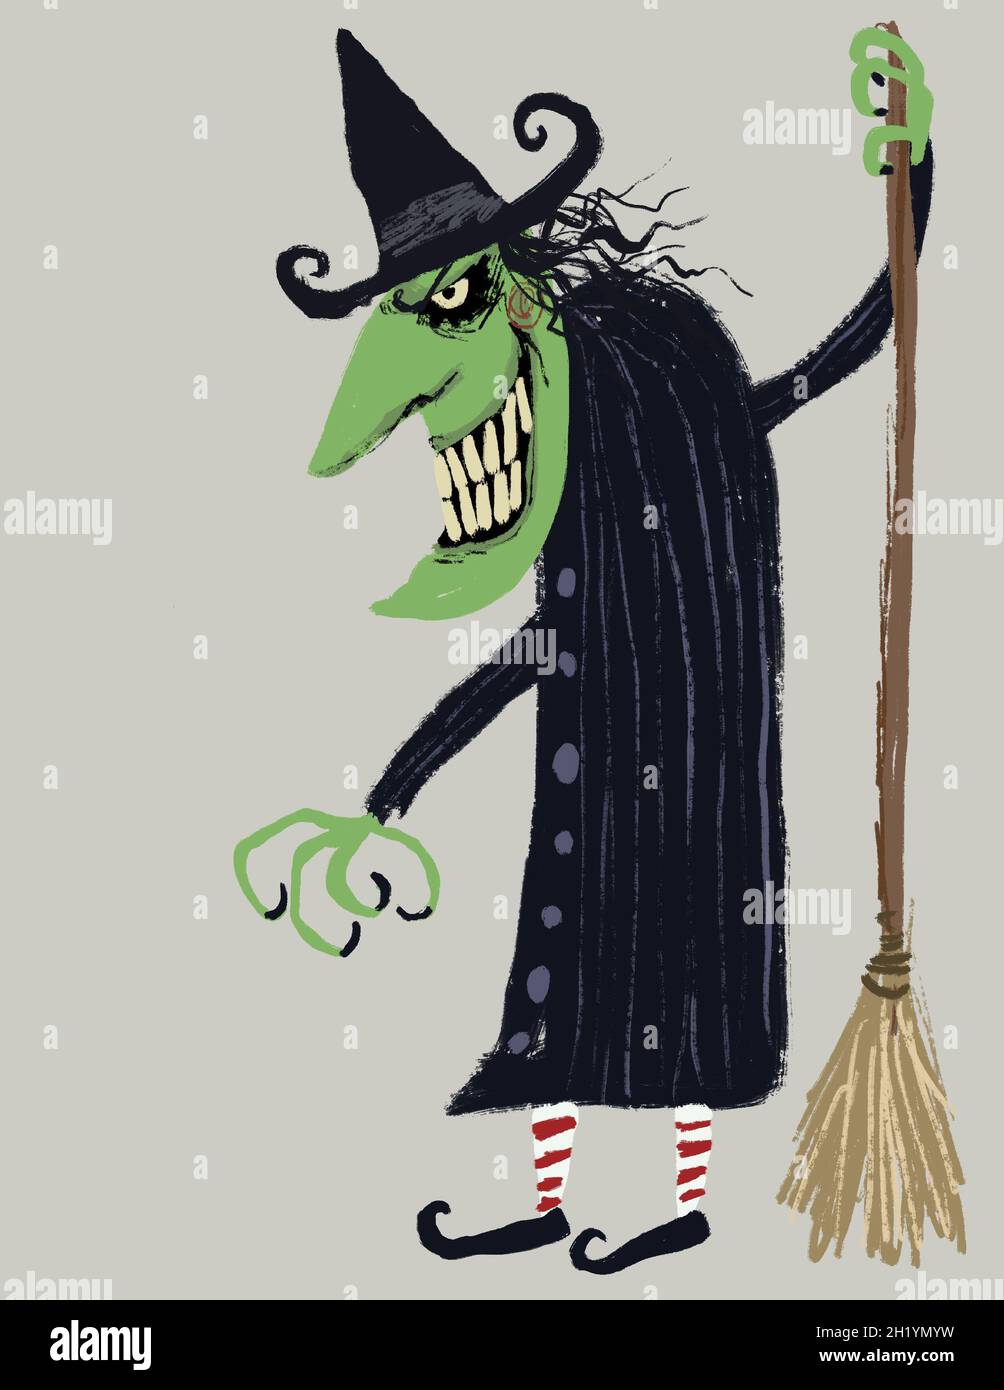 evil wicked witch illustration Stock Photo